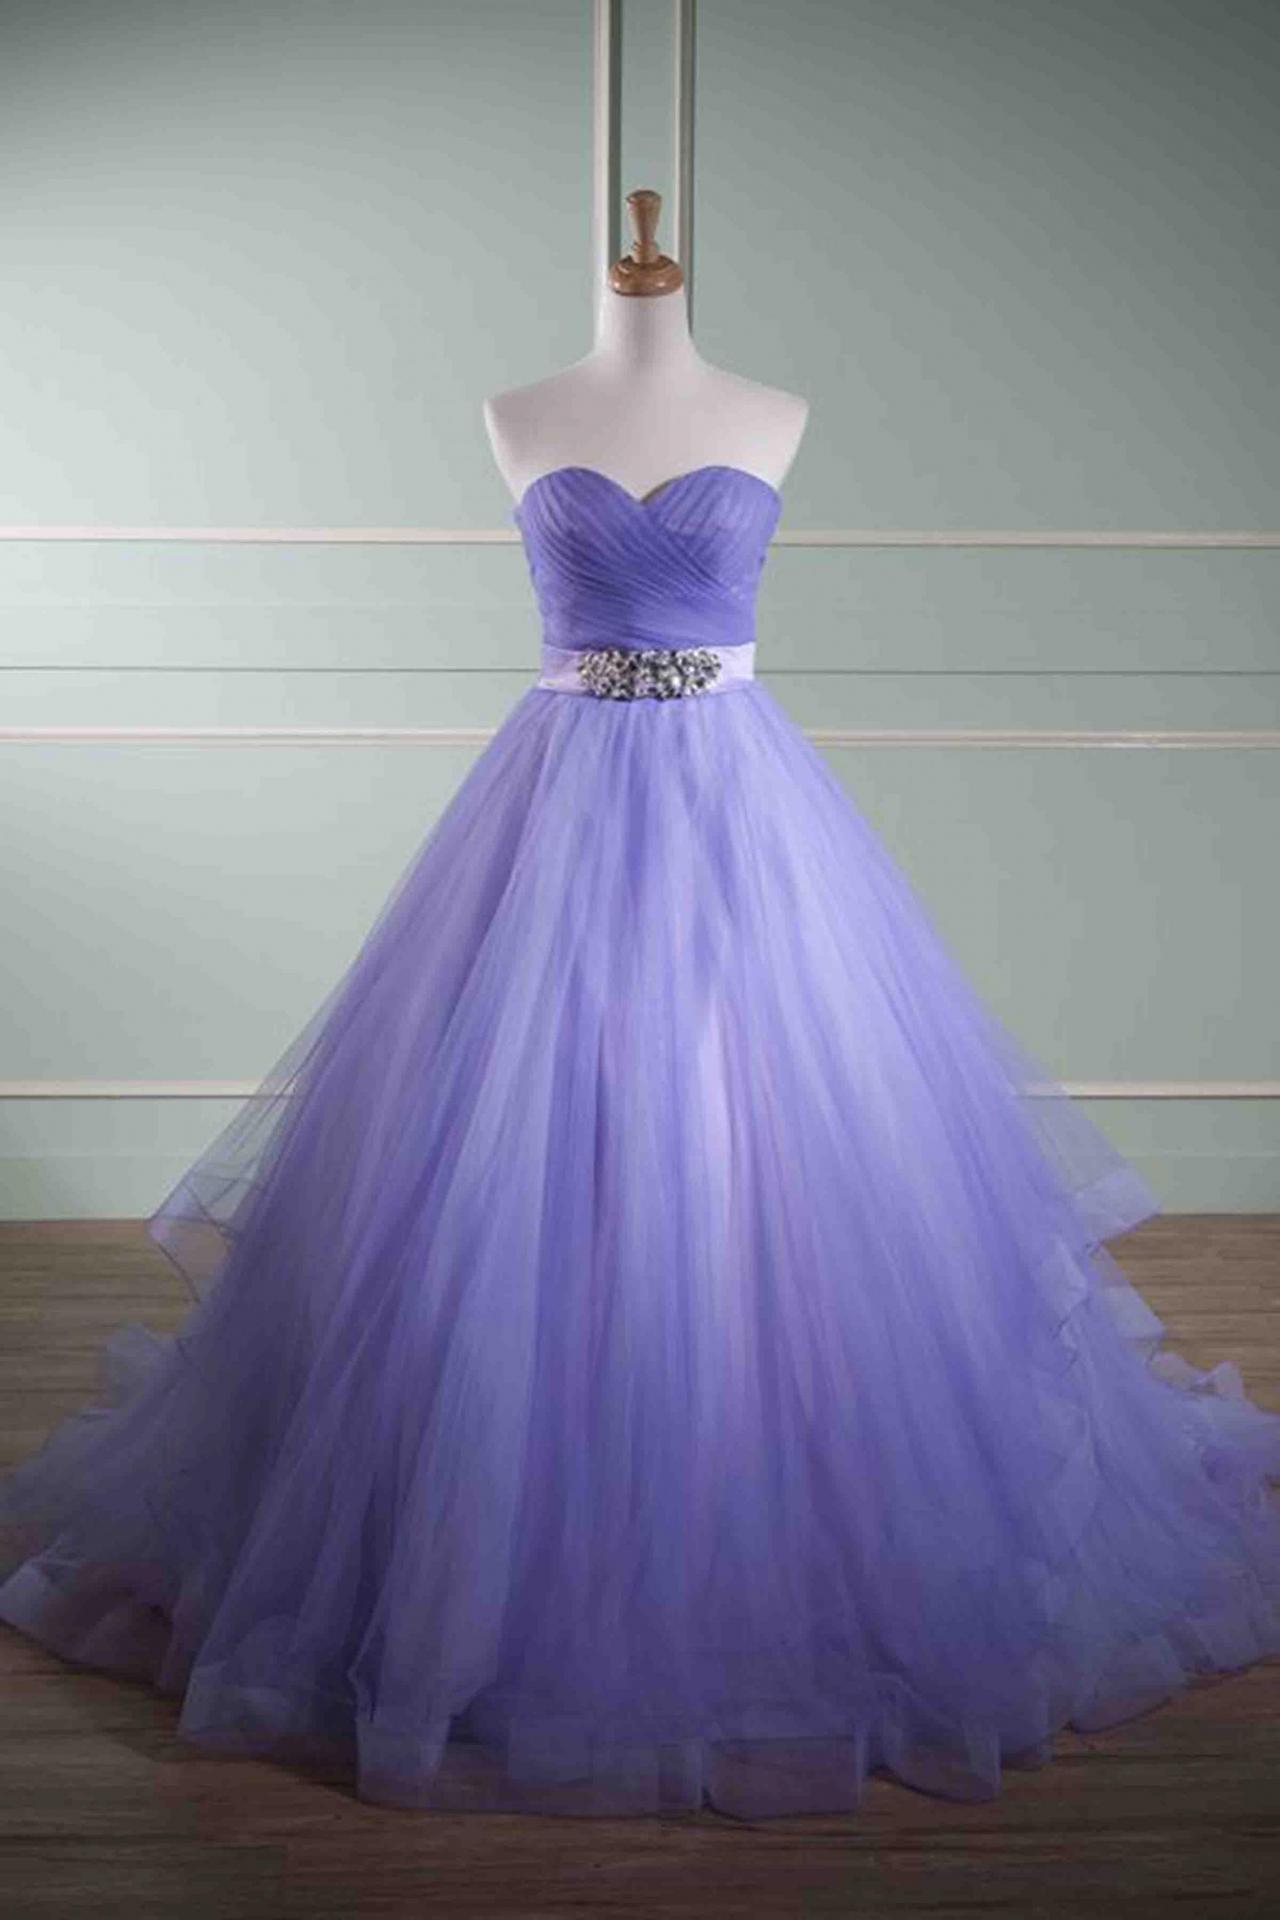 Purple Tulle Sweetheart Train Ball Gown Dresses,p2986